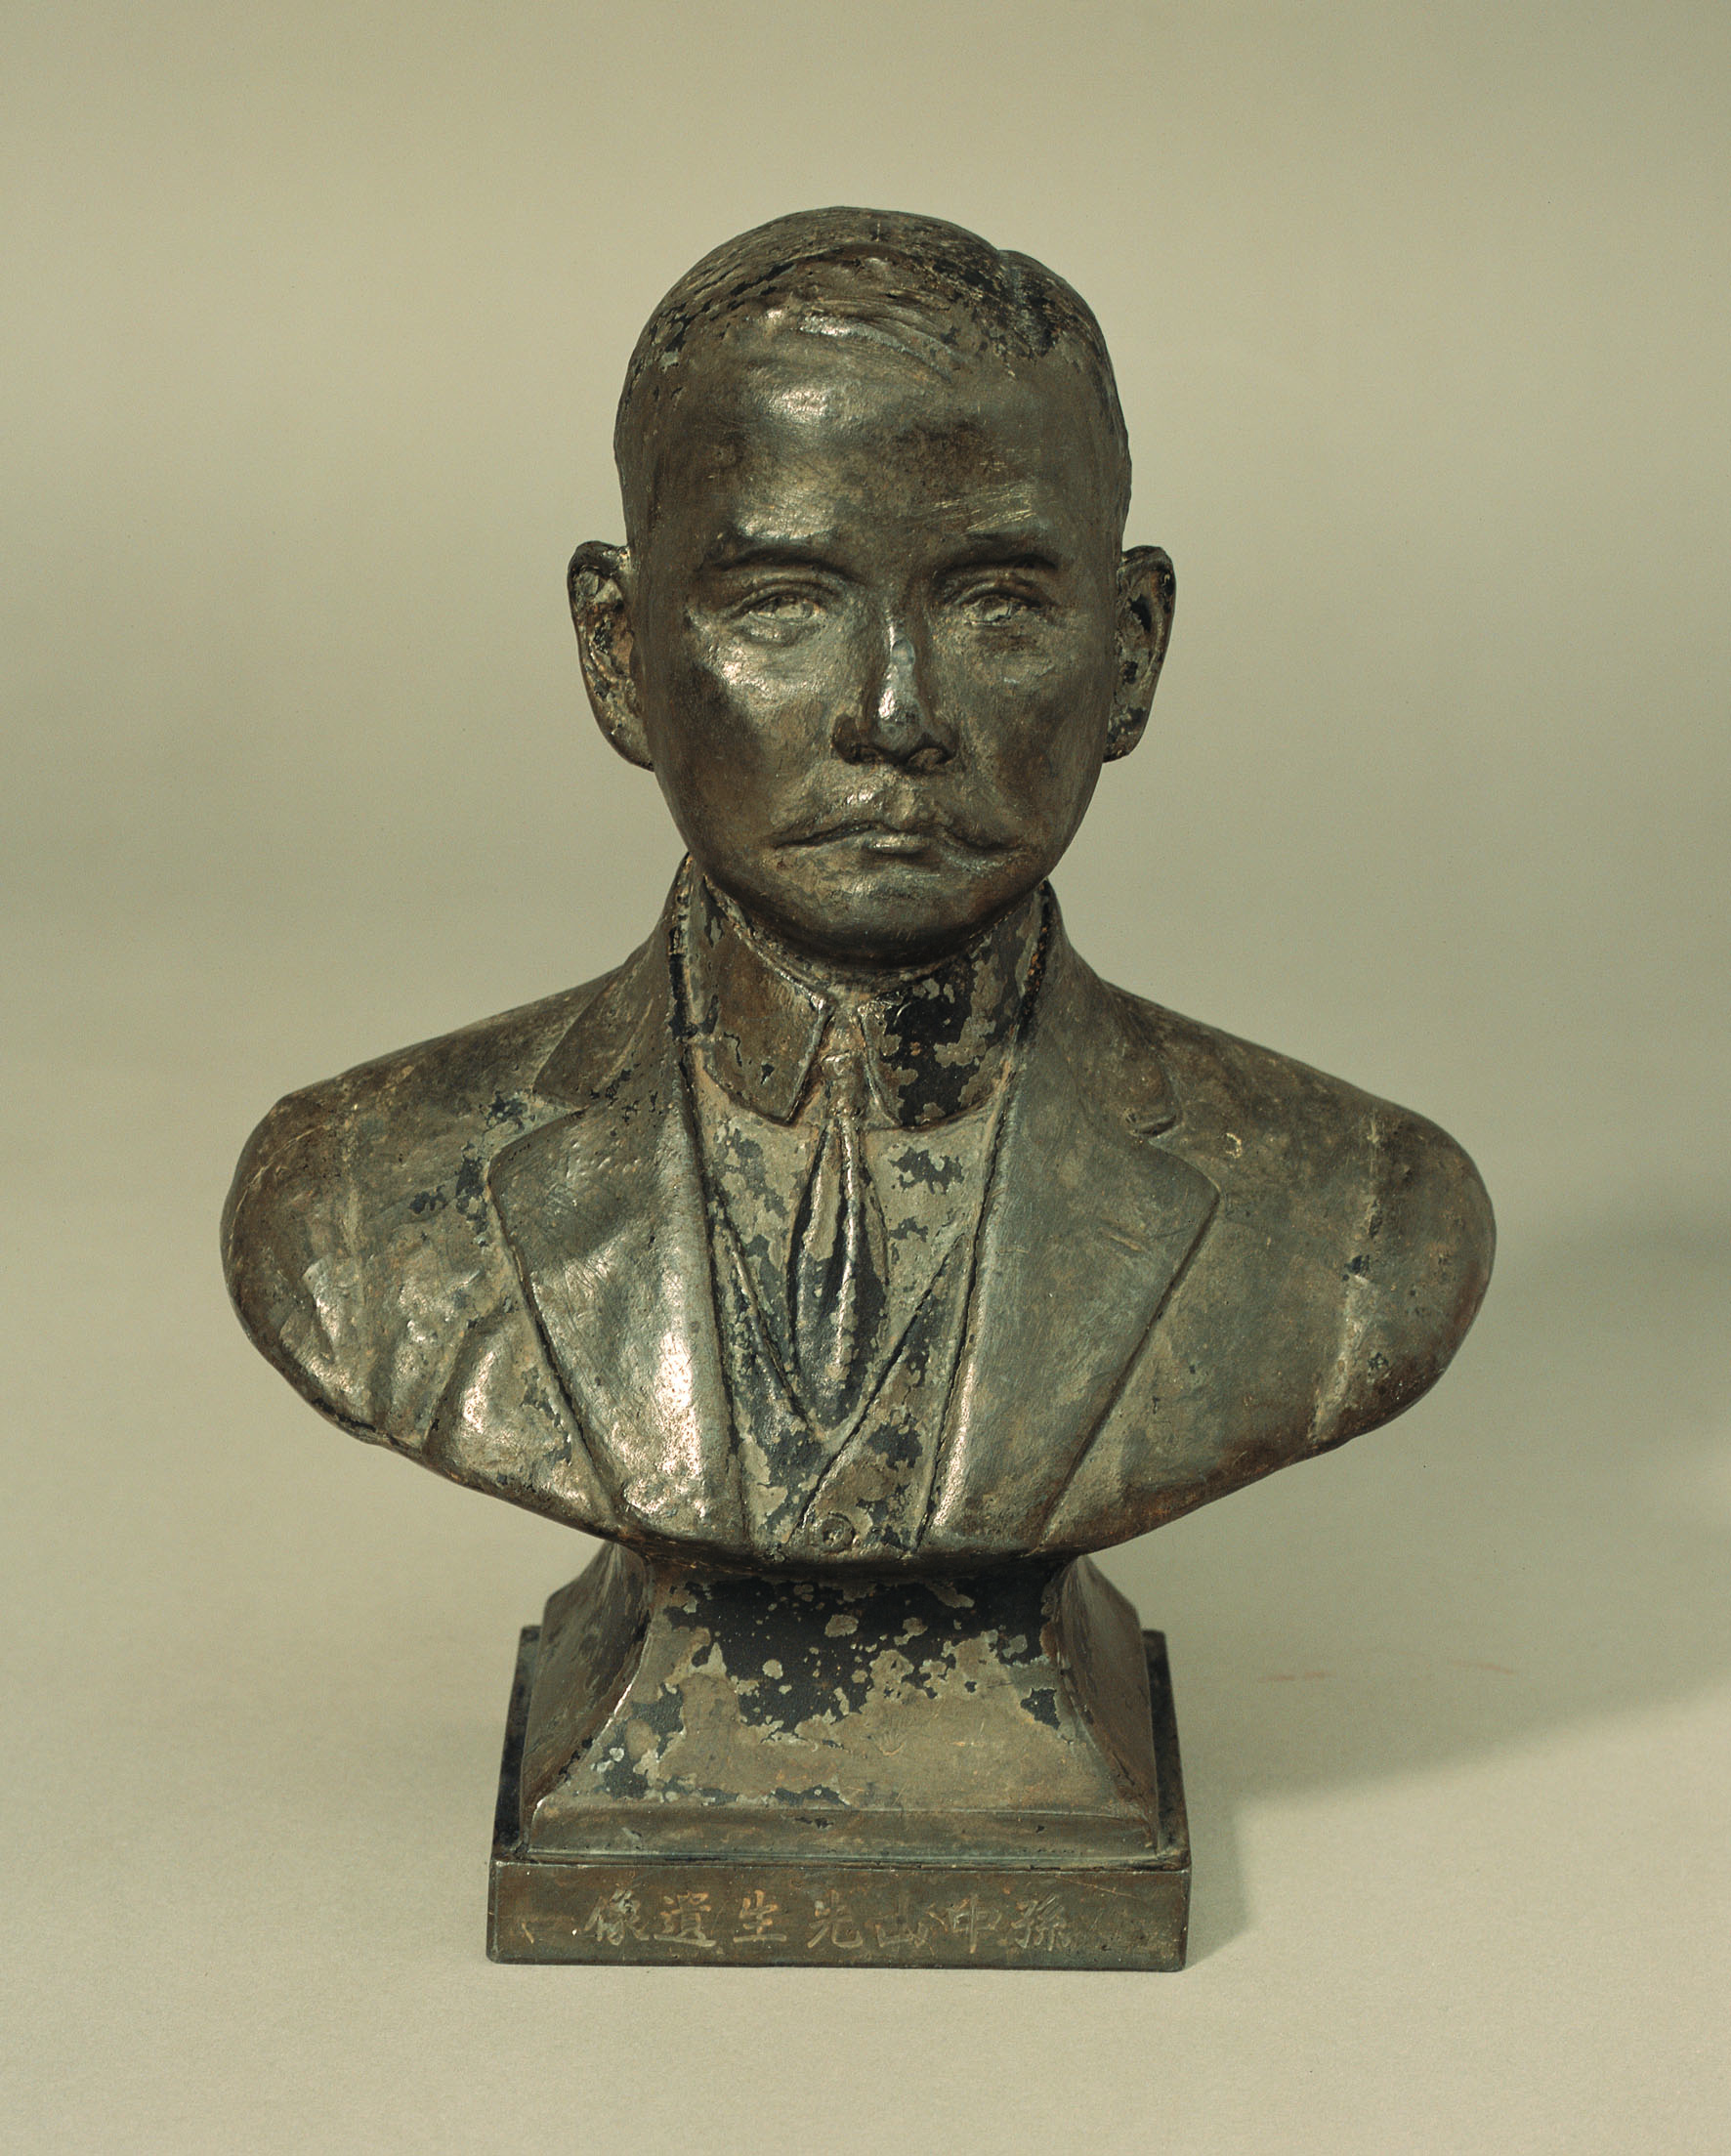 A bronze bust of Dr Sun Yat-sen made at the order of his Japanese friend Umeya Shokichi, 1929.